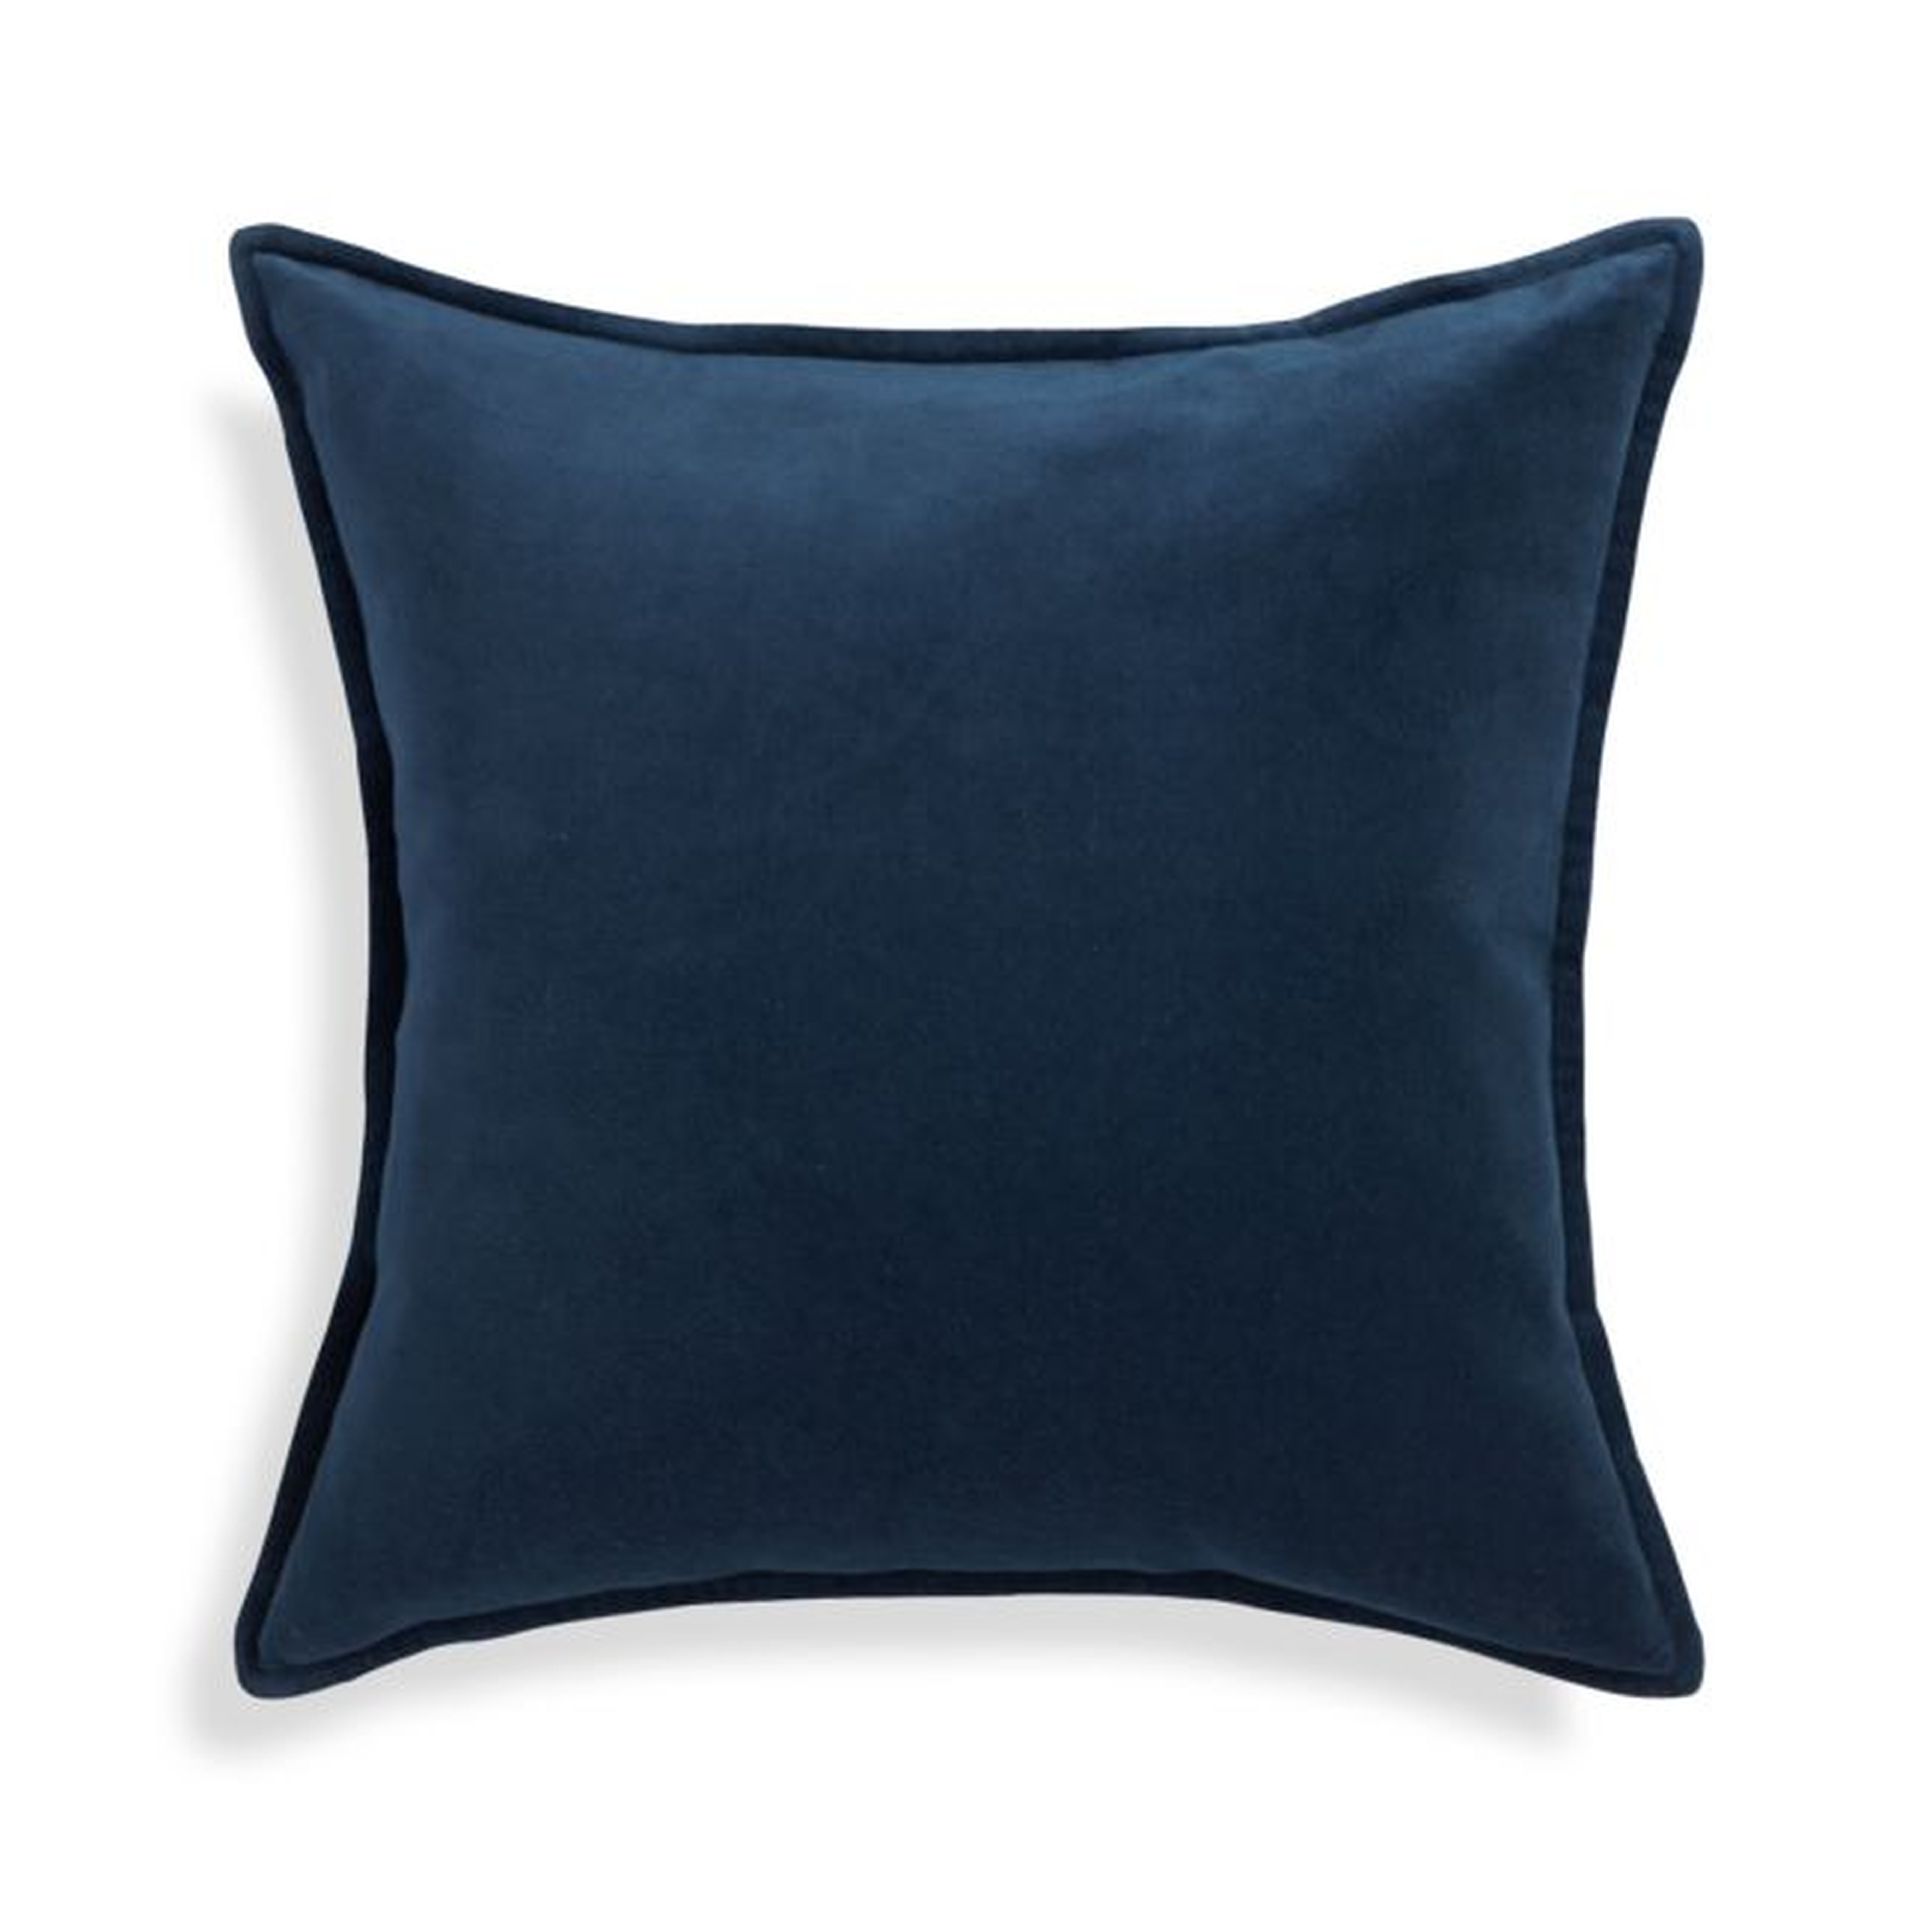 Washed Cotton Velvet Pillow with Feather-Down Insert, Indigo Blue, 20" x 20" - Crate and Barrel